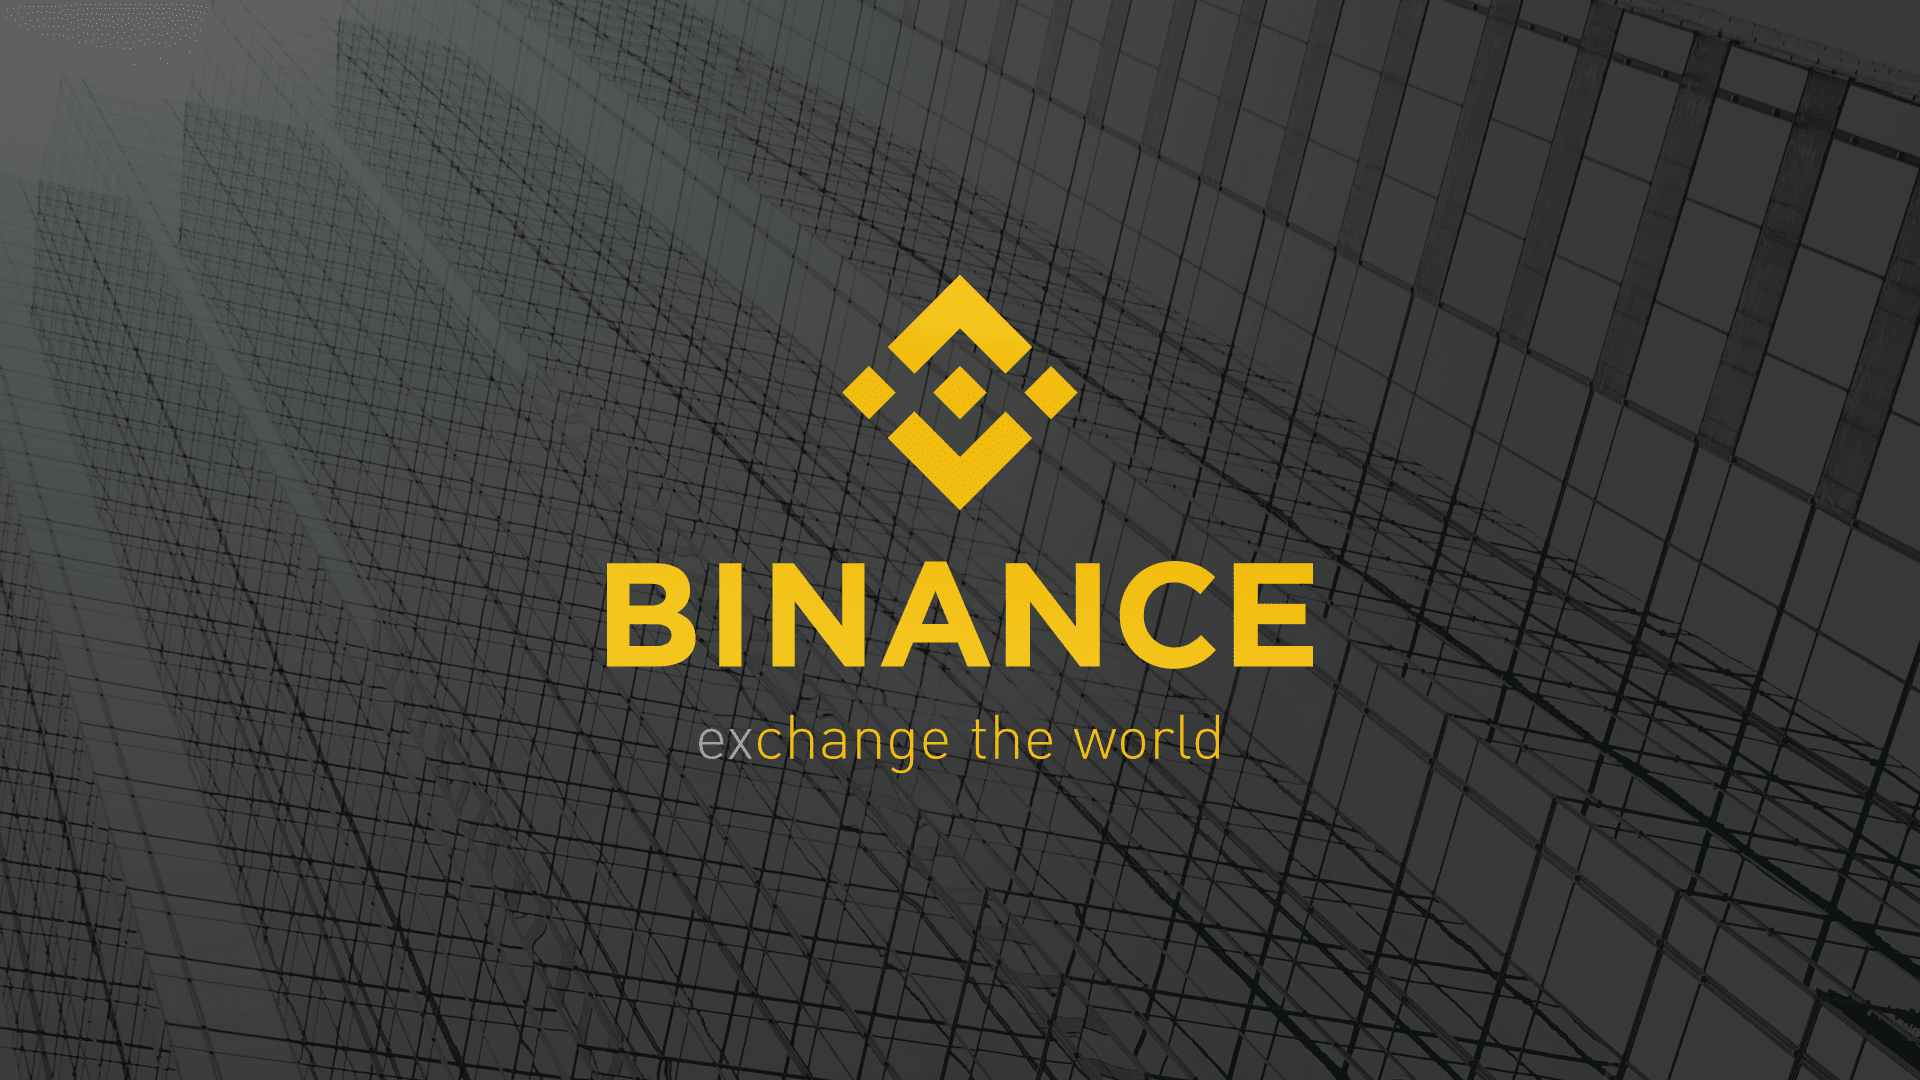 How to Buy Binance Coin (BNB) Without Binance